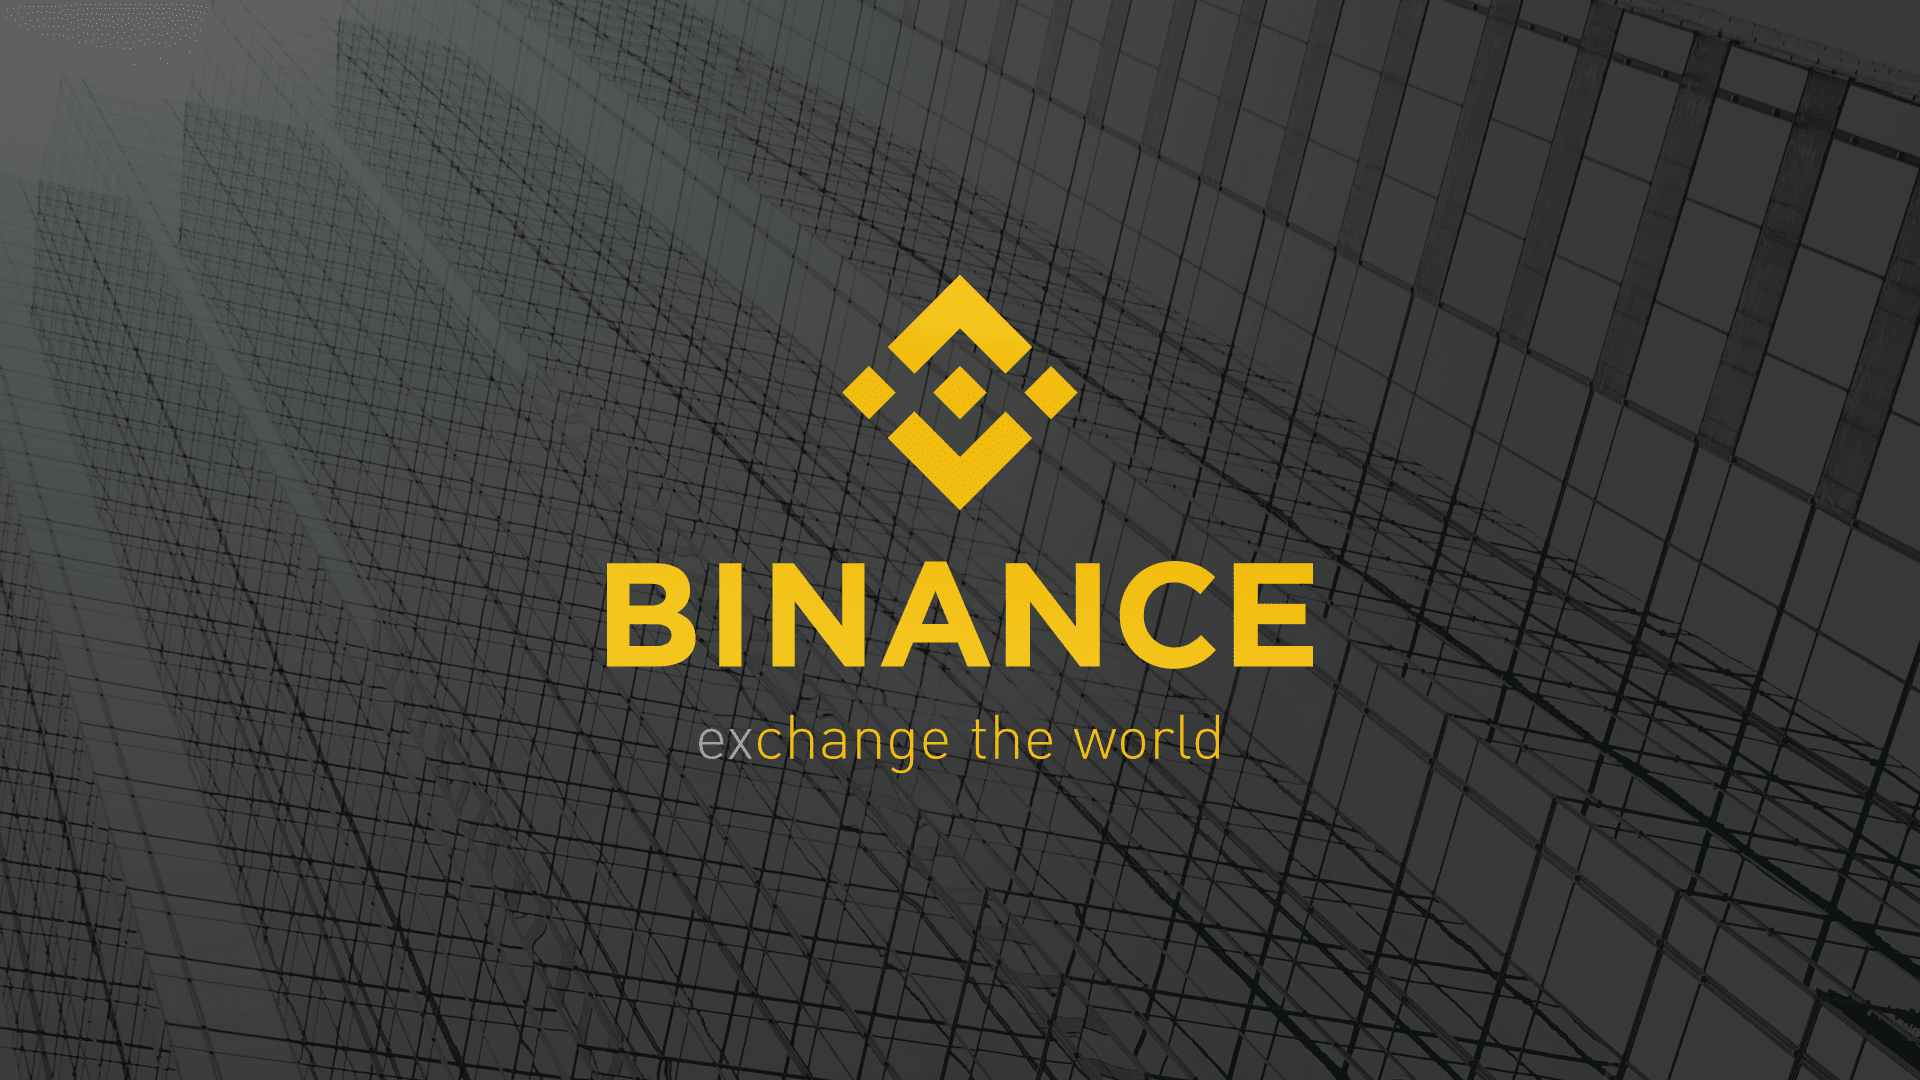 How to Buy Binance Coin (BNB) Without Binance